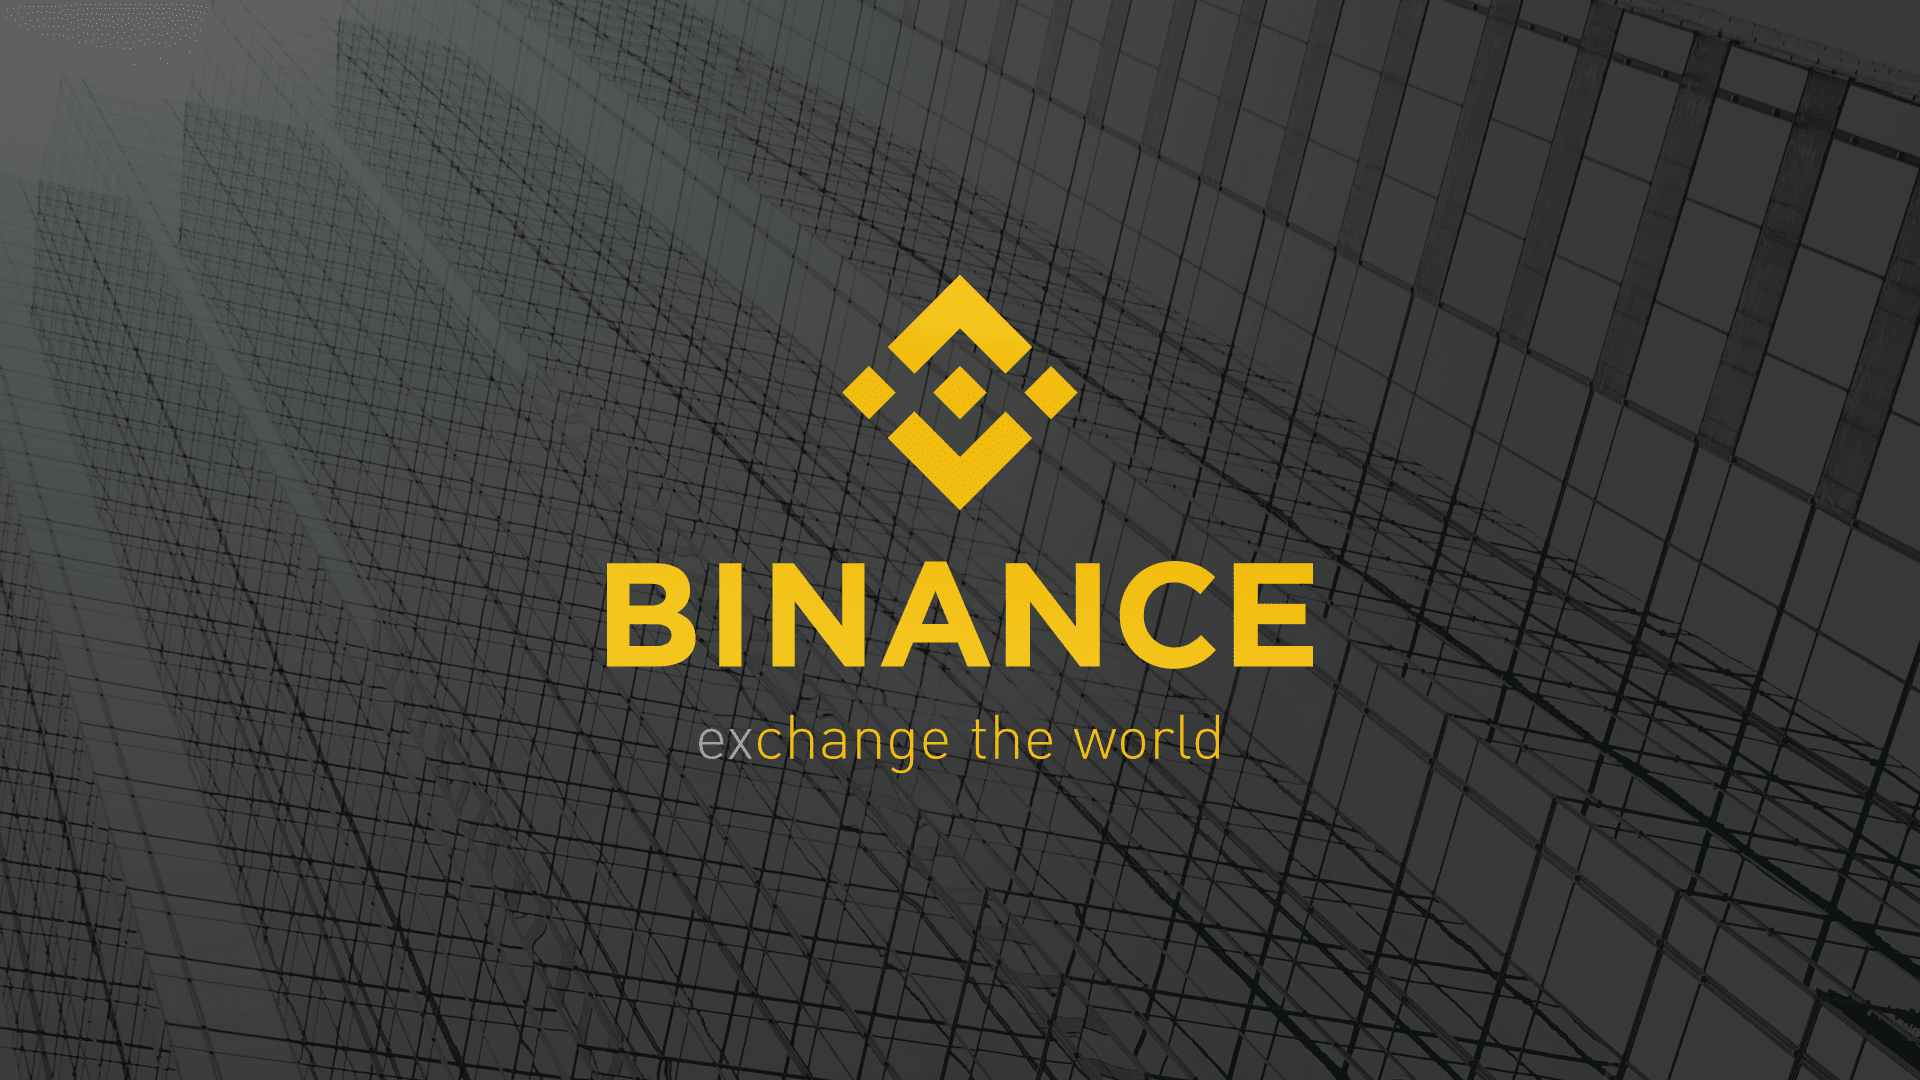 How to Buy Binance Coin (BNB) Without Binance